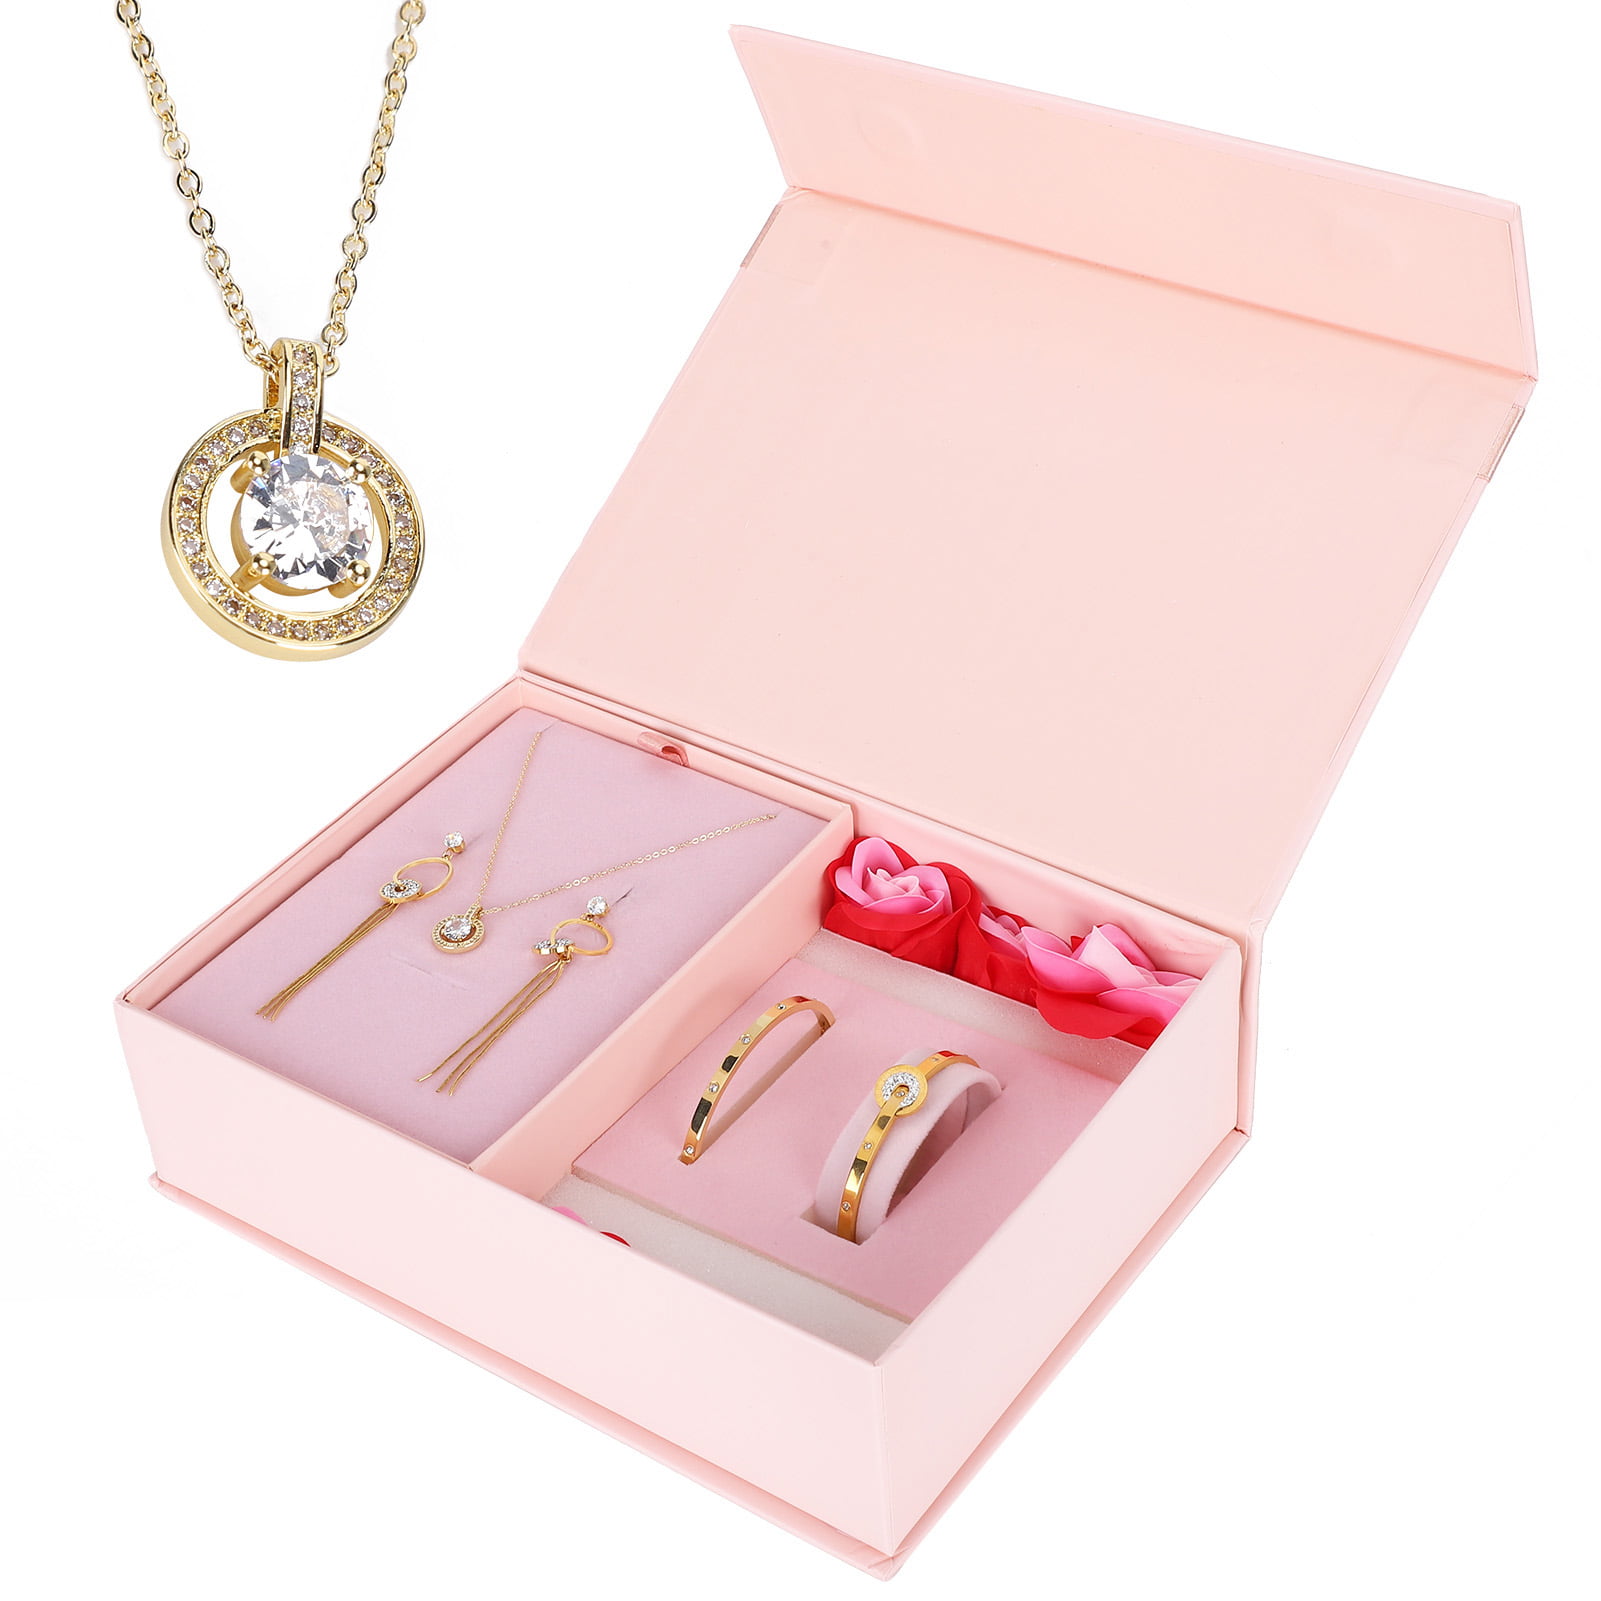 New Jewelry Gift Box for Bracelet Pendant Necklace 